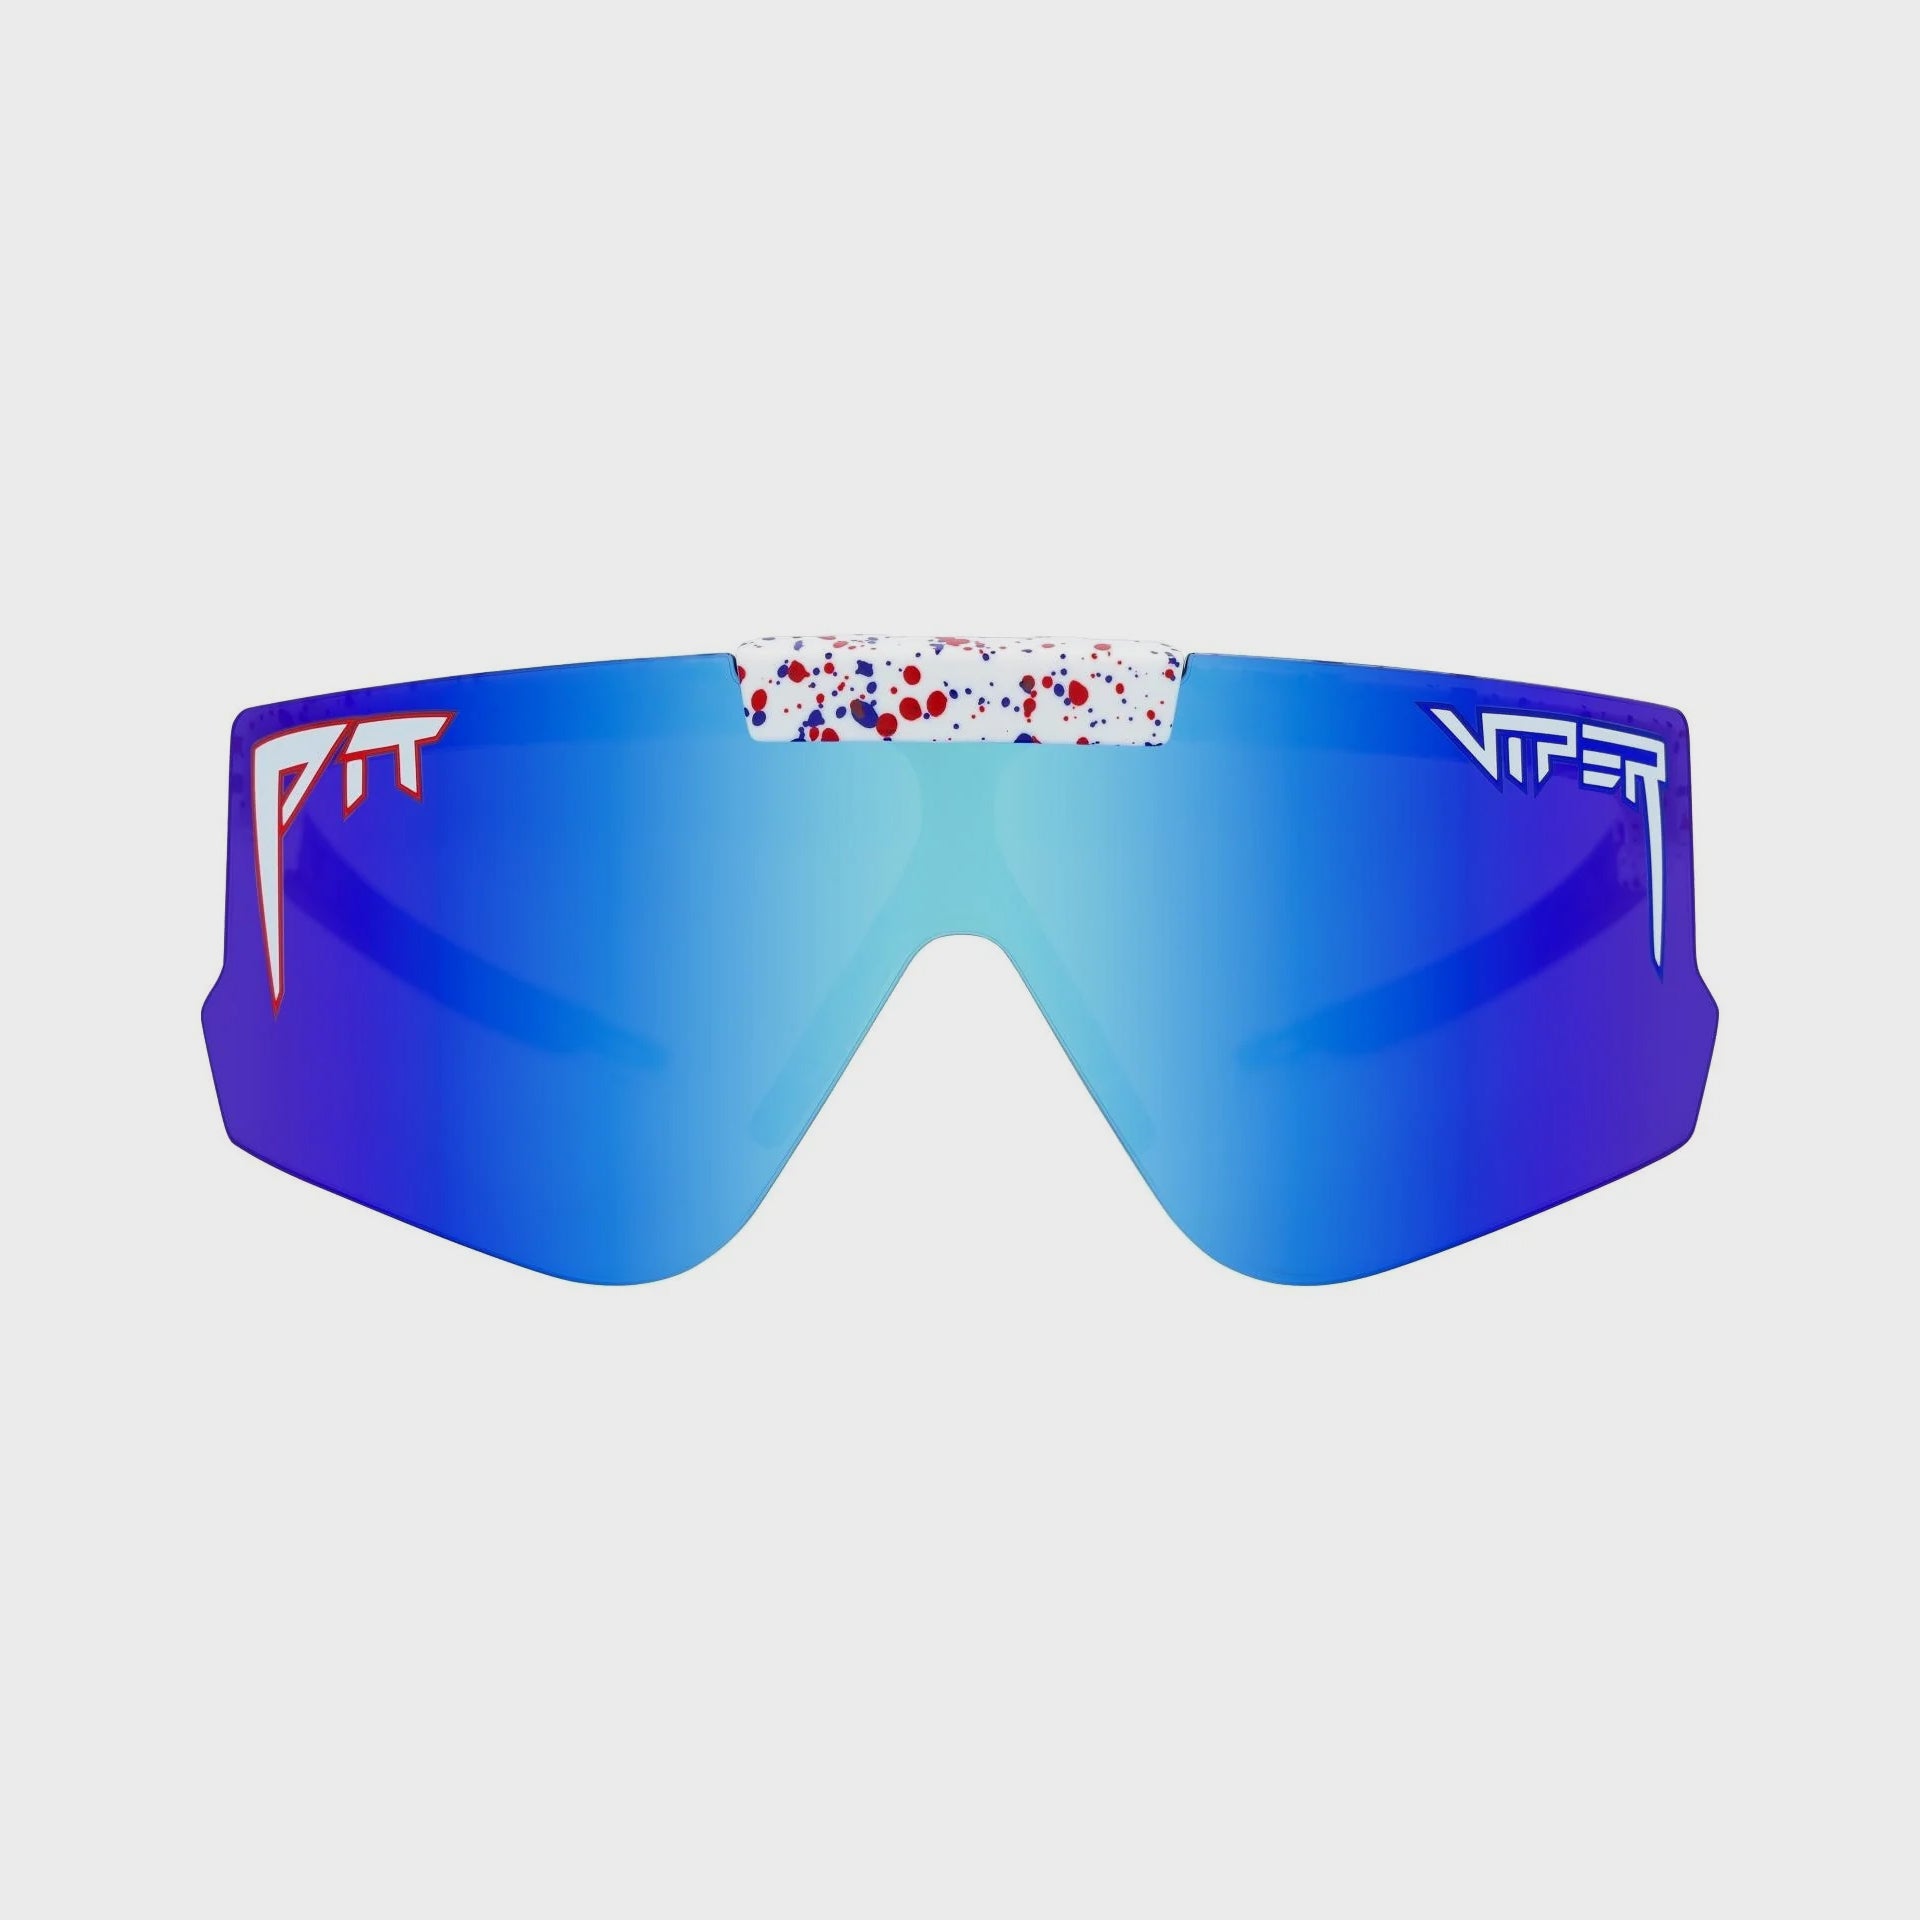 Pit Viper The Absolute Freedom Flip-Off Sunglasses - ManGo Surfing